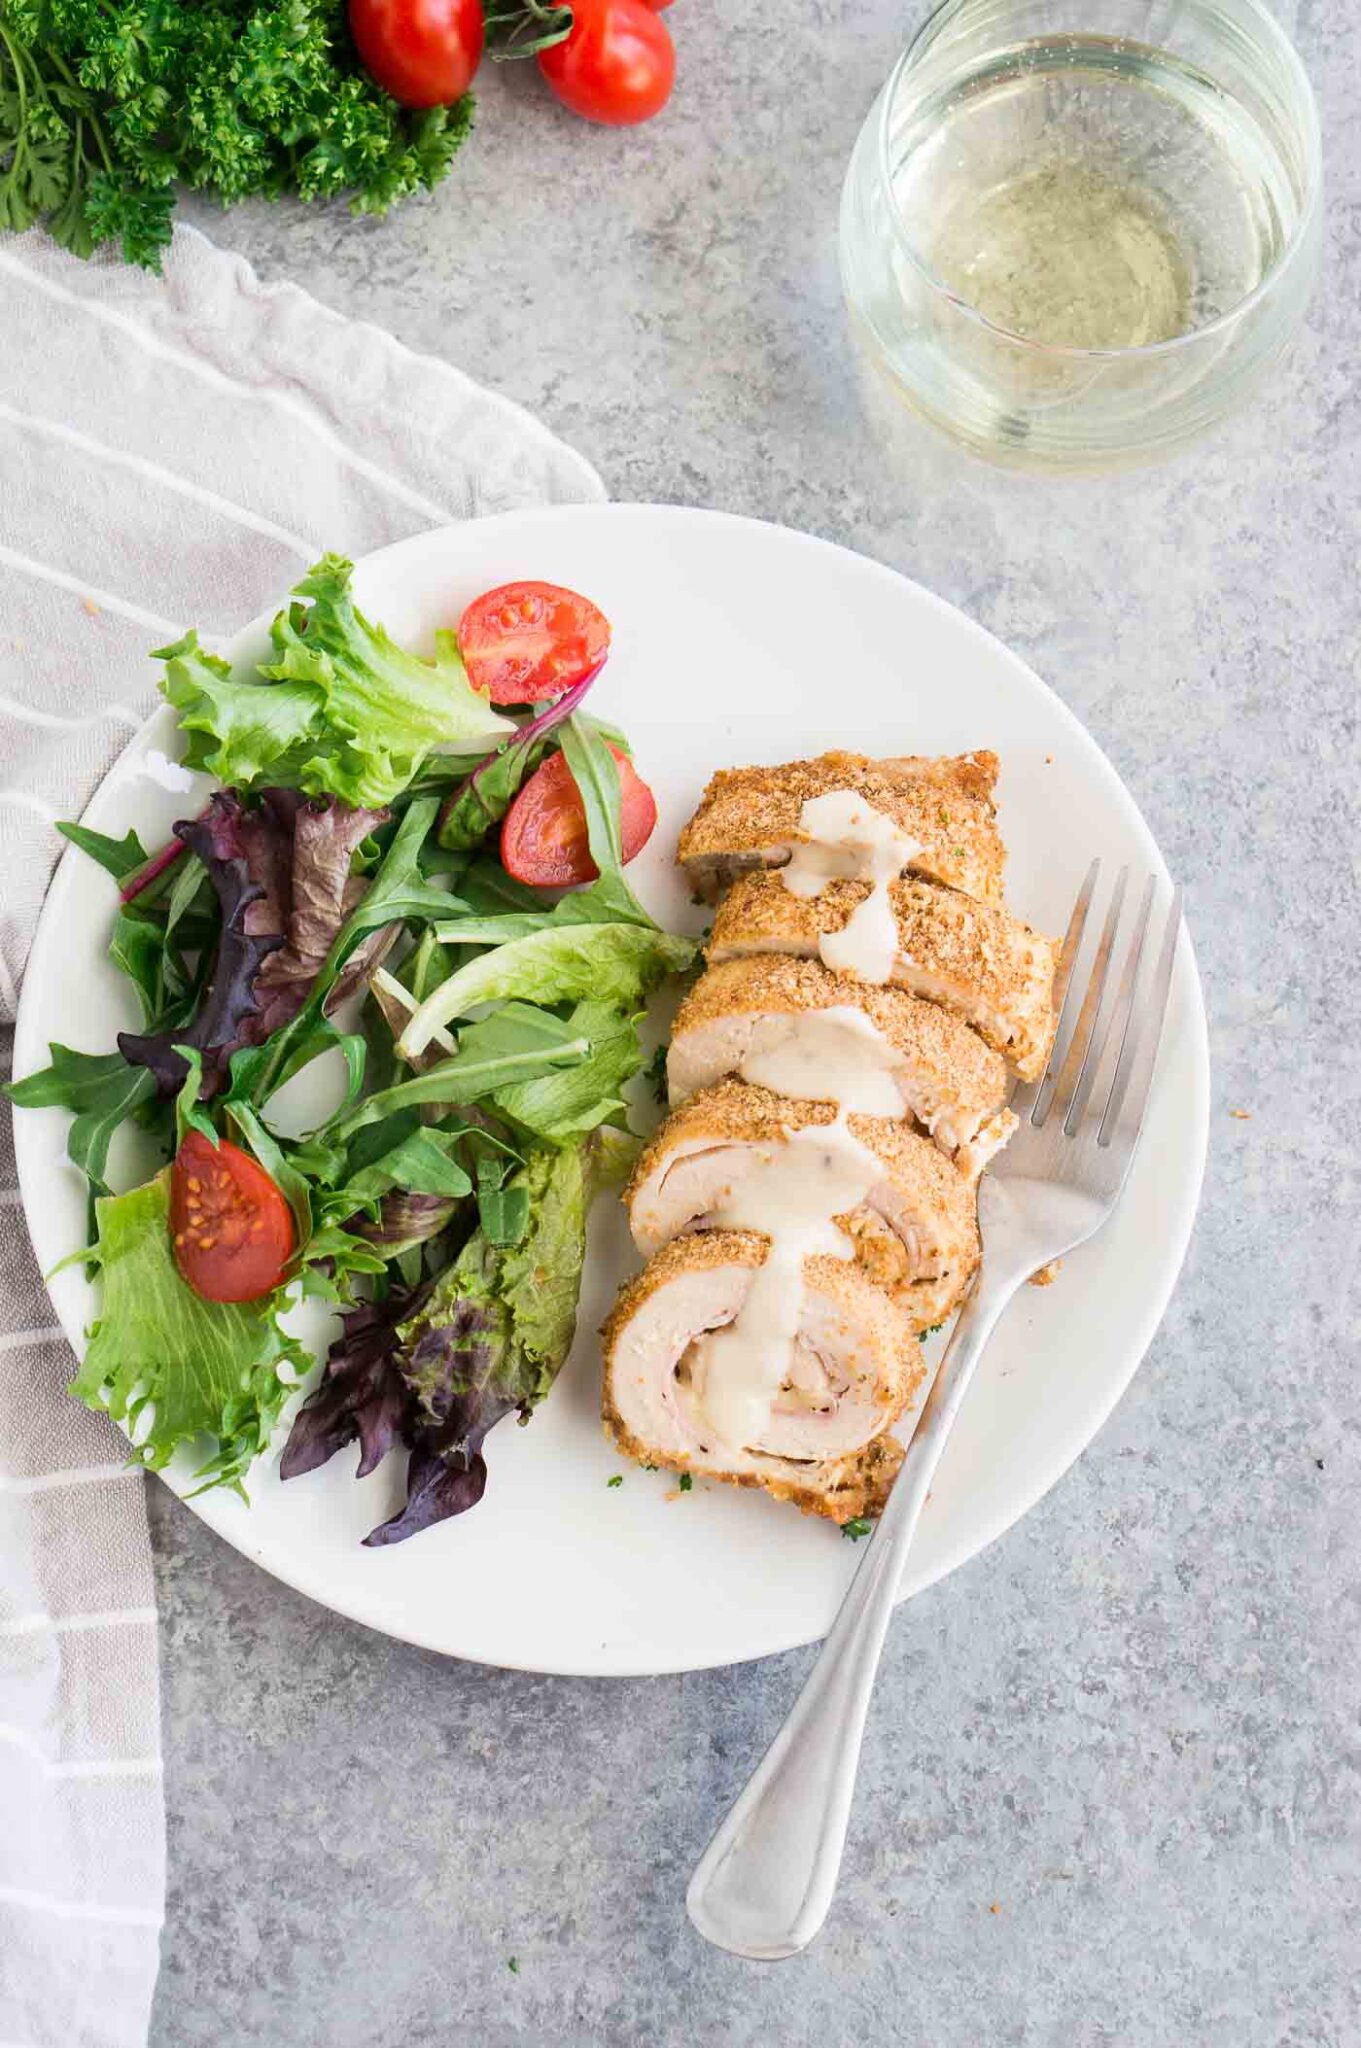 chicken cordon bleu with sauce and salad on a plate